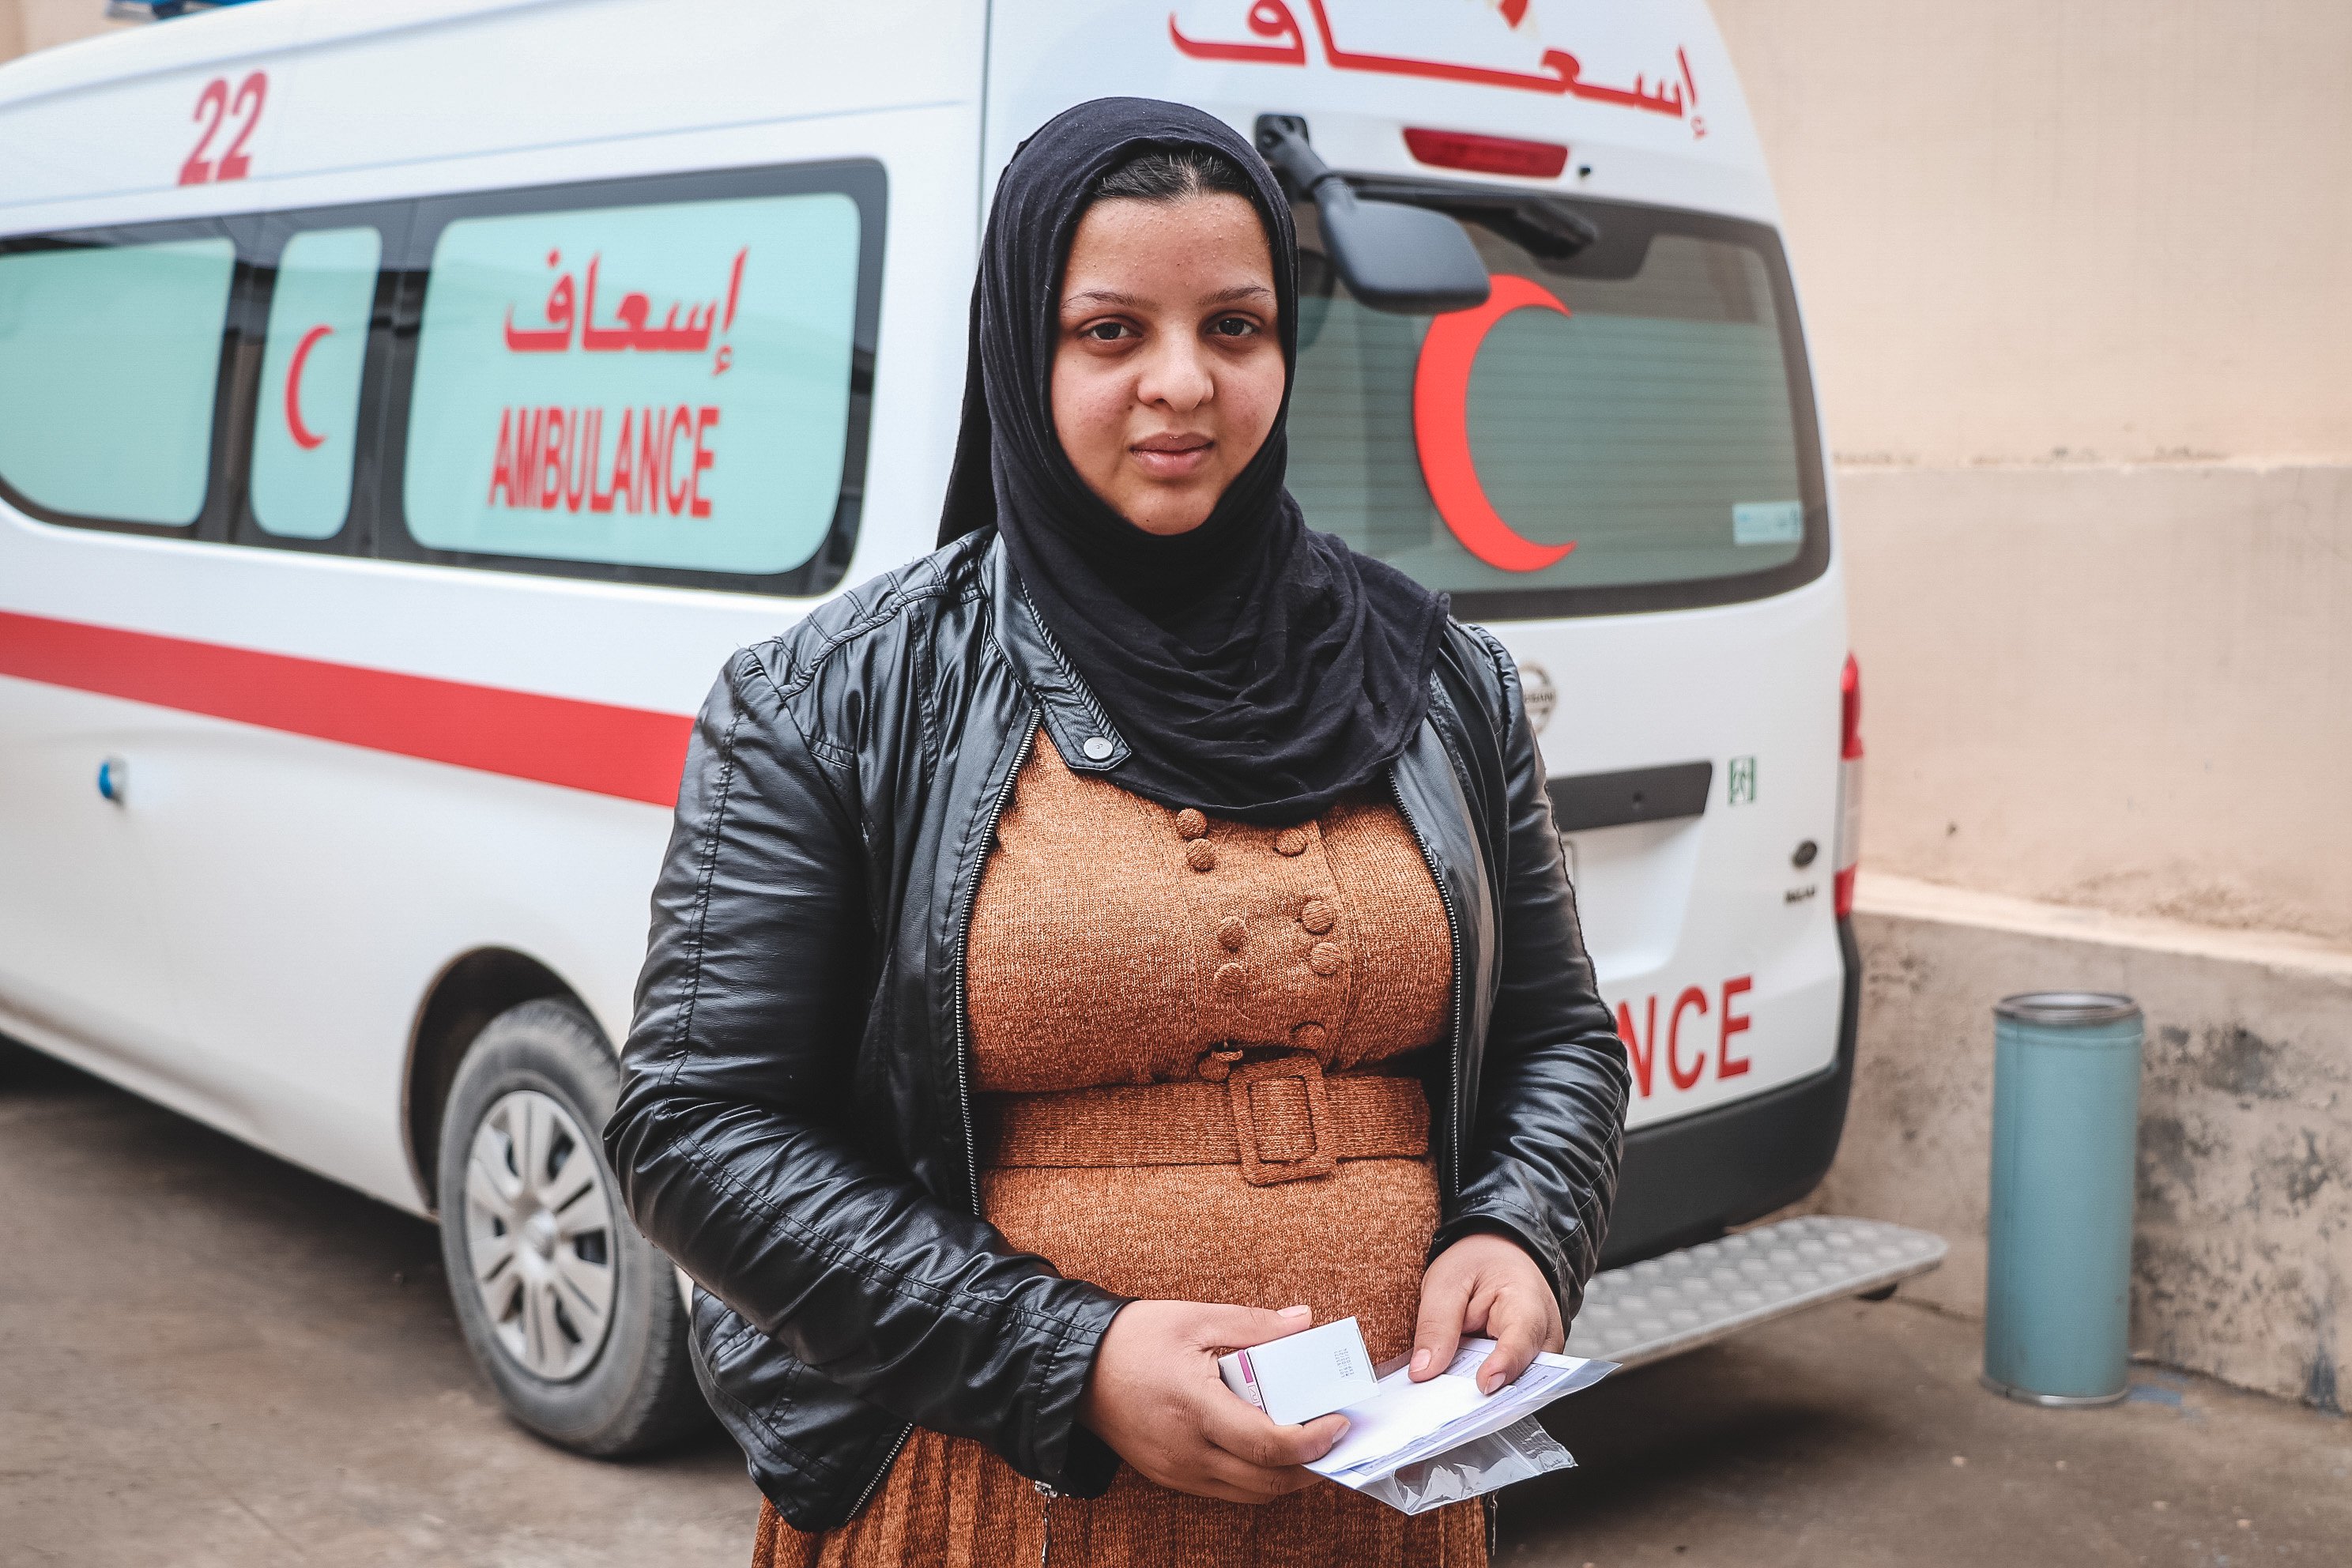 Mariam, 20 years old, lives in Mosul. She came to MSF’s Al Amal maternity to attend an antenatal care consultation. She’s pregnant with her third child.